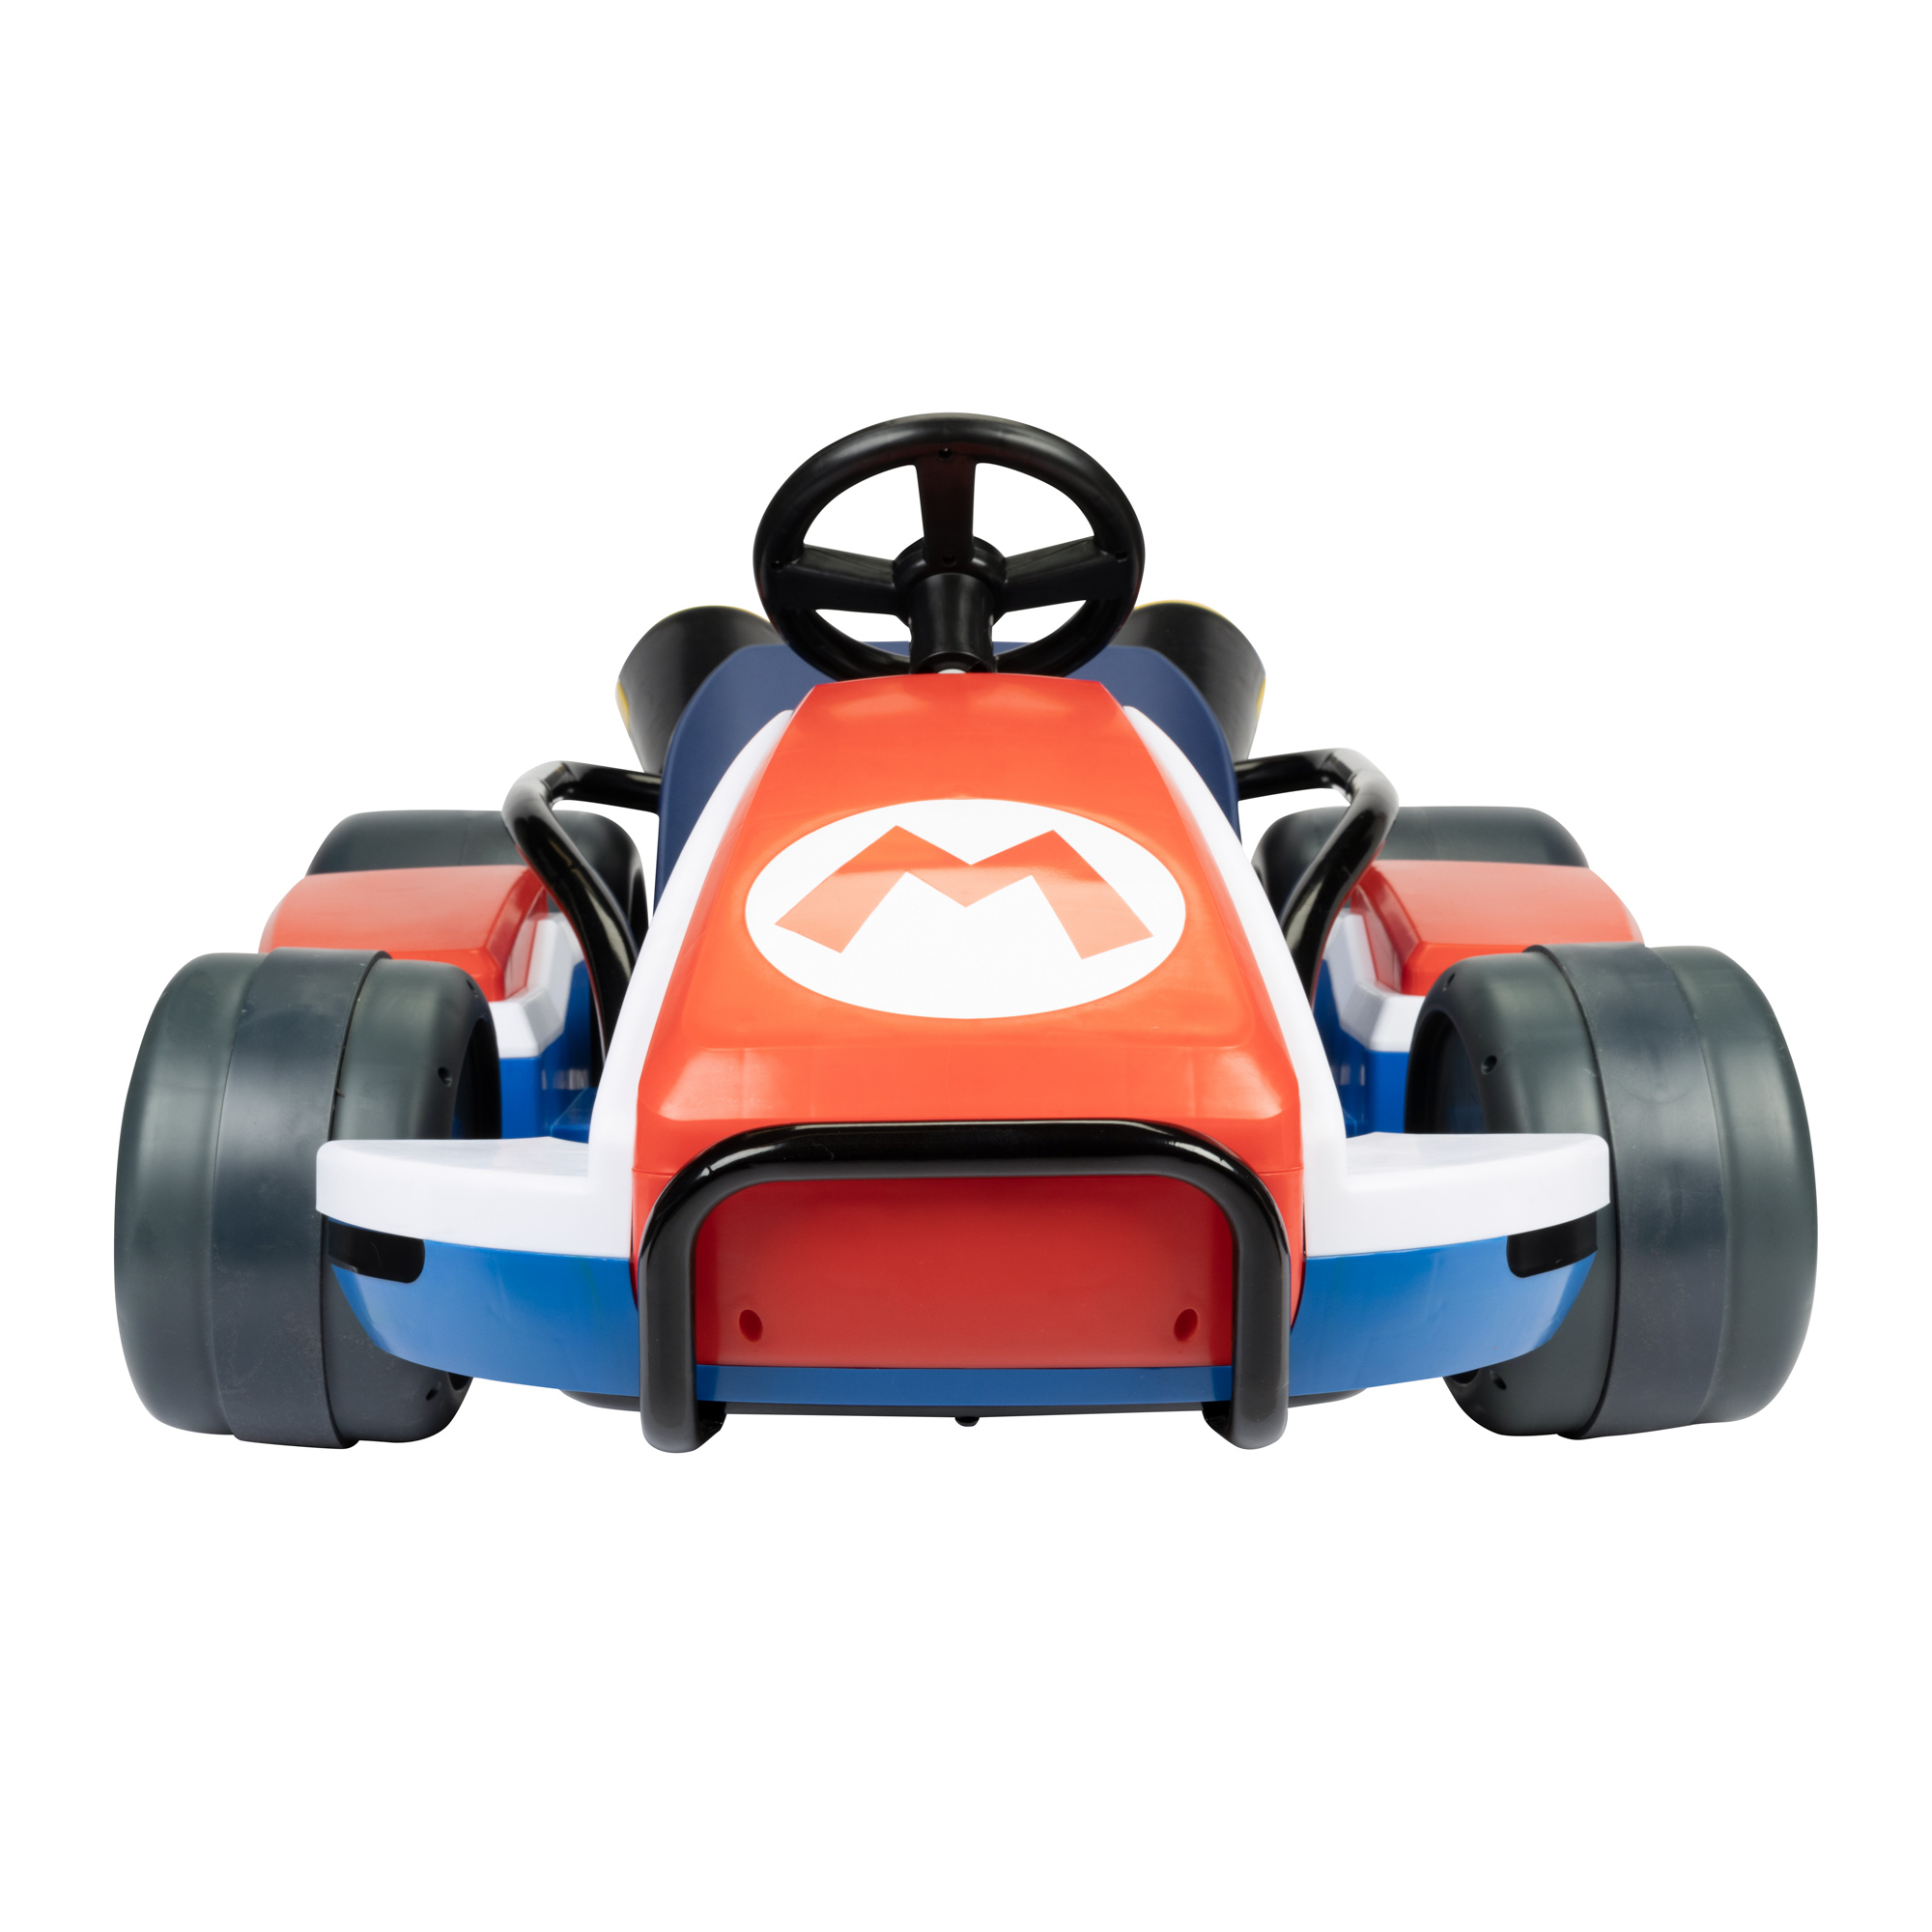 Nintendo Super Mario Kart 24V Battery Operated 3-Speed Drifting Ride-on, 8  mph, for a Child Ages 3-8 